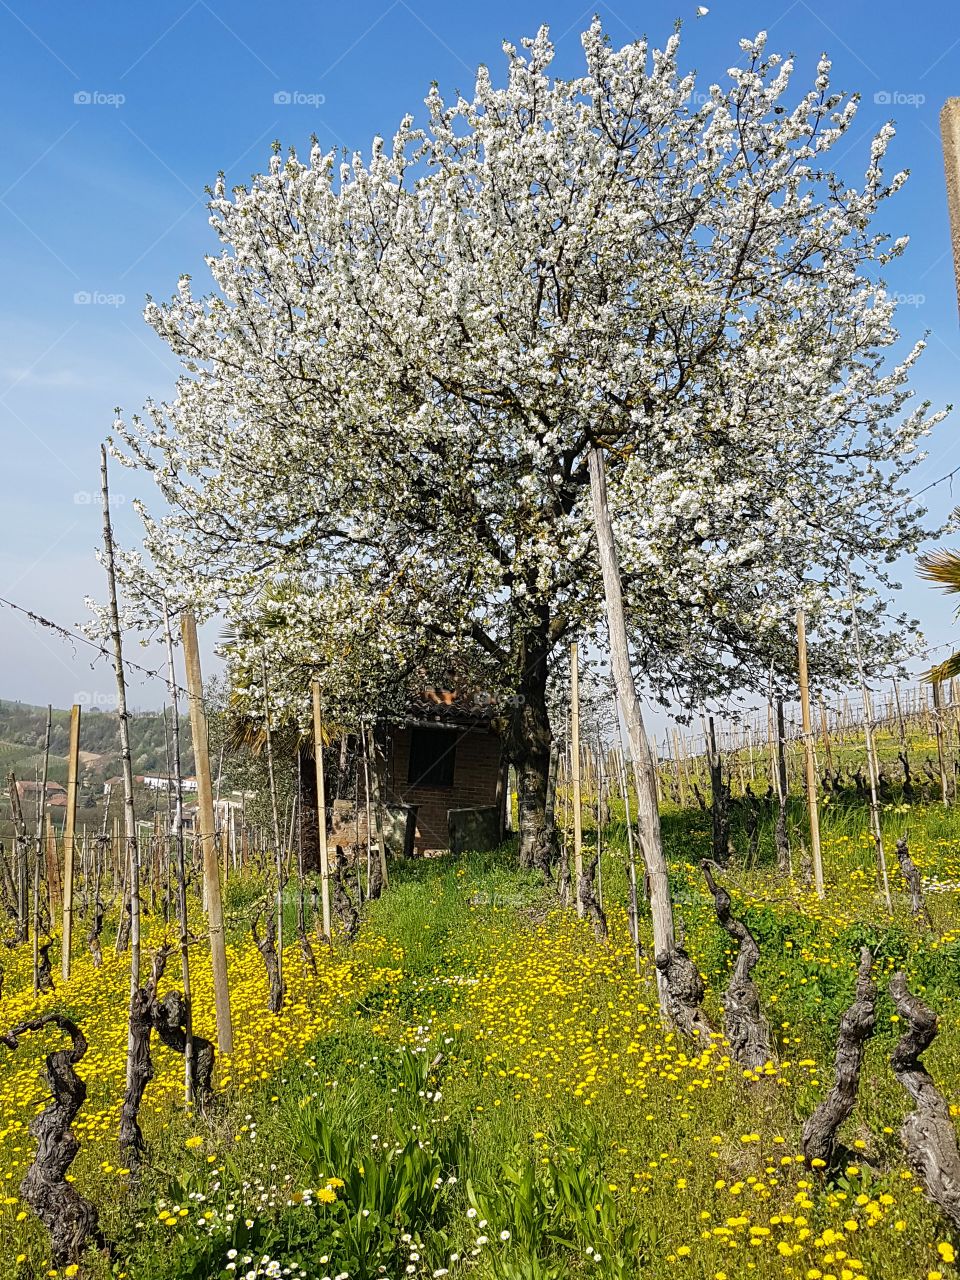 Blooming tree in a vineyard in italian countryside at springtime